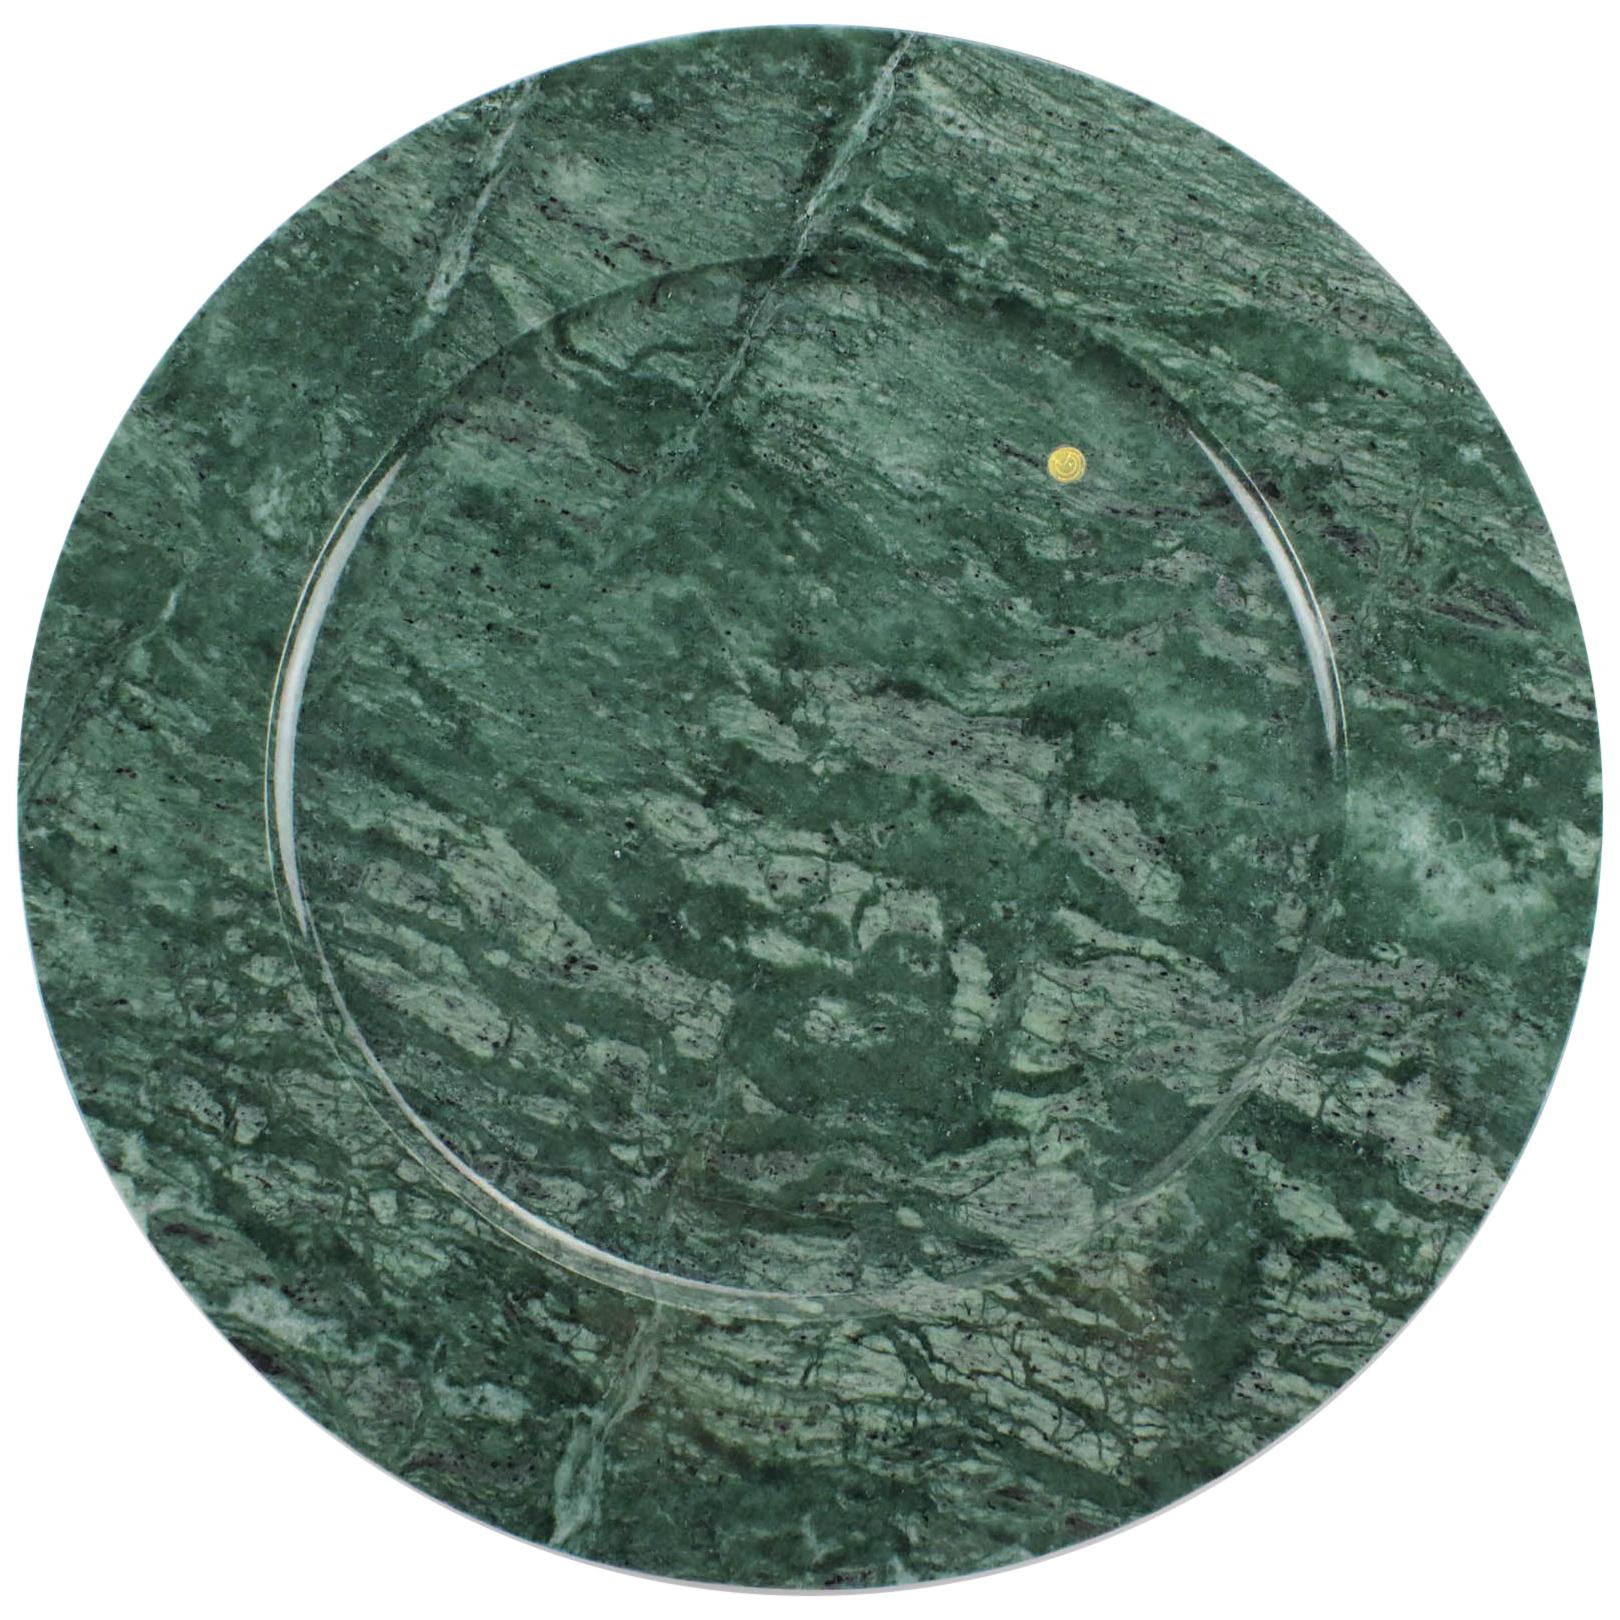 Charger Plate Platters Serveware Set of 4 Imperial Green Marble Handmade Italy